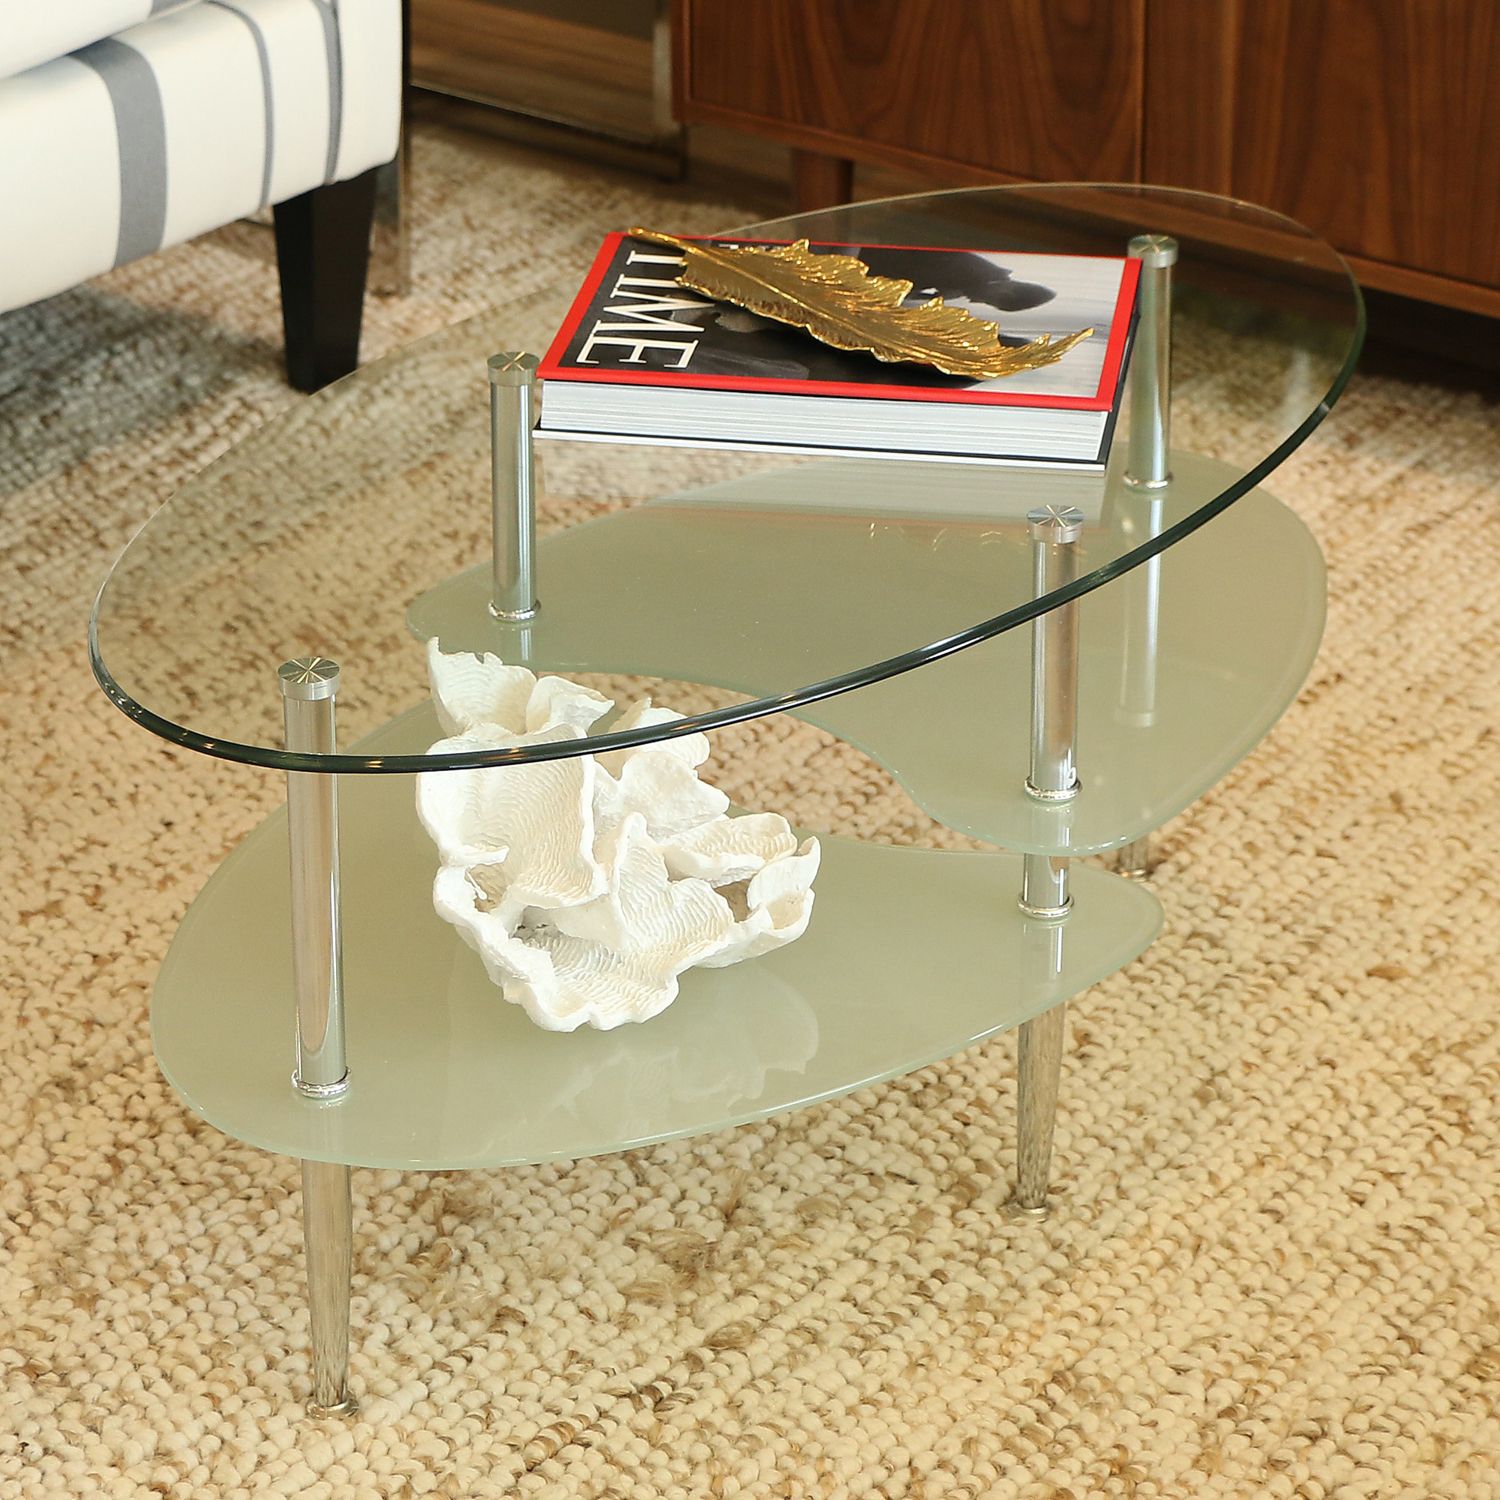 Oval Glass Coffee Table With Chrome Legs – Pier1 Imports Within Oval Glass Coffee Tables (Gallery 8 of 20)